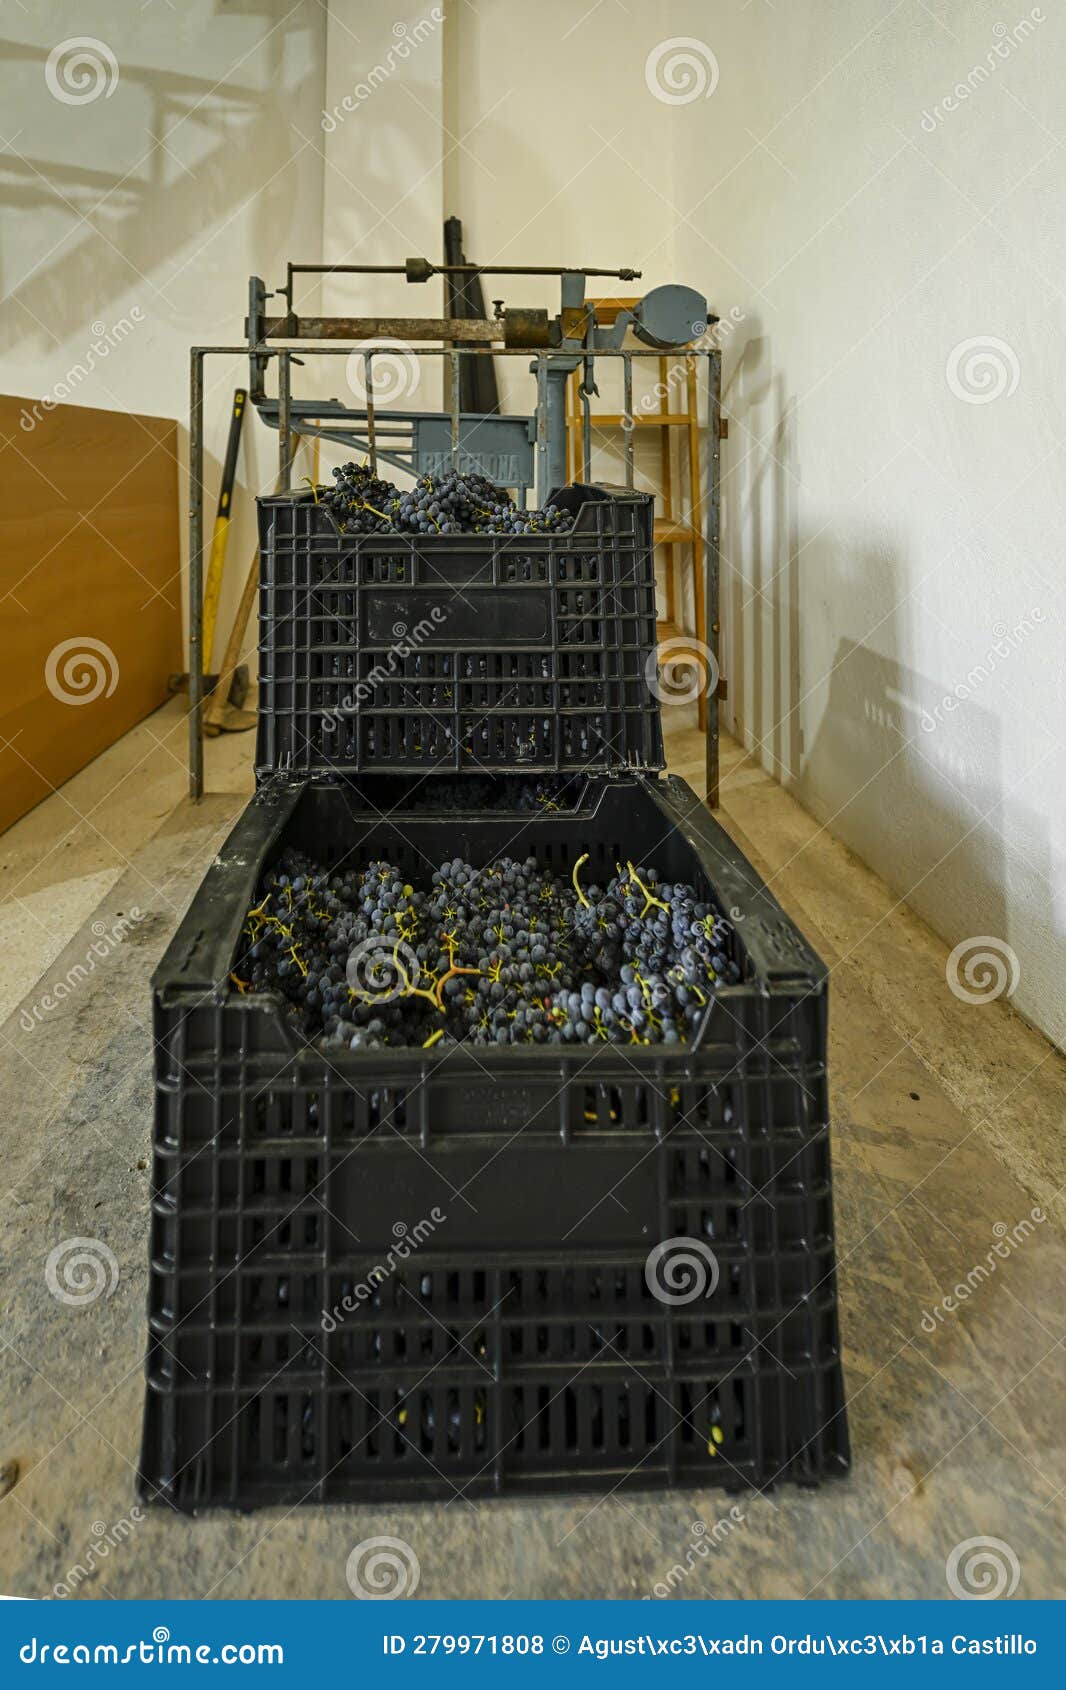 iron scale of 500 kg, weighing boxes of grapes at harvest.